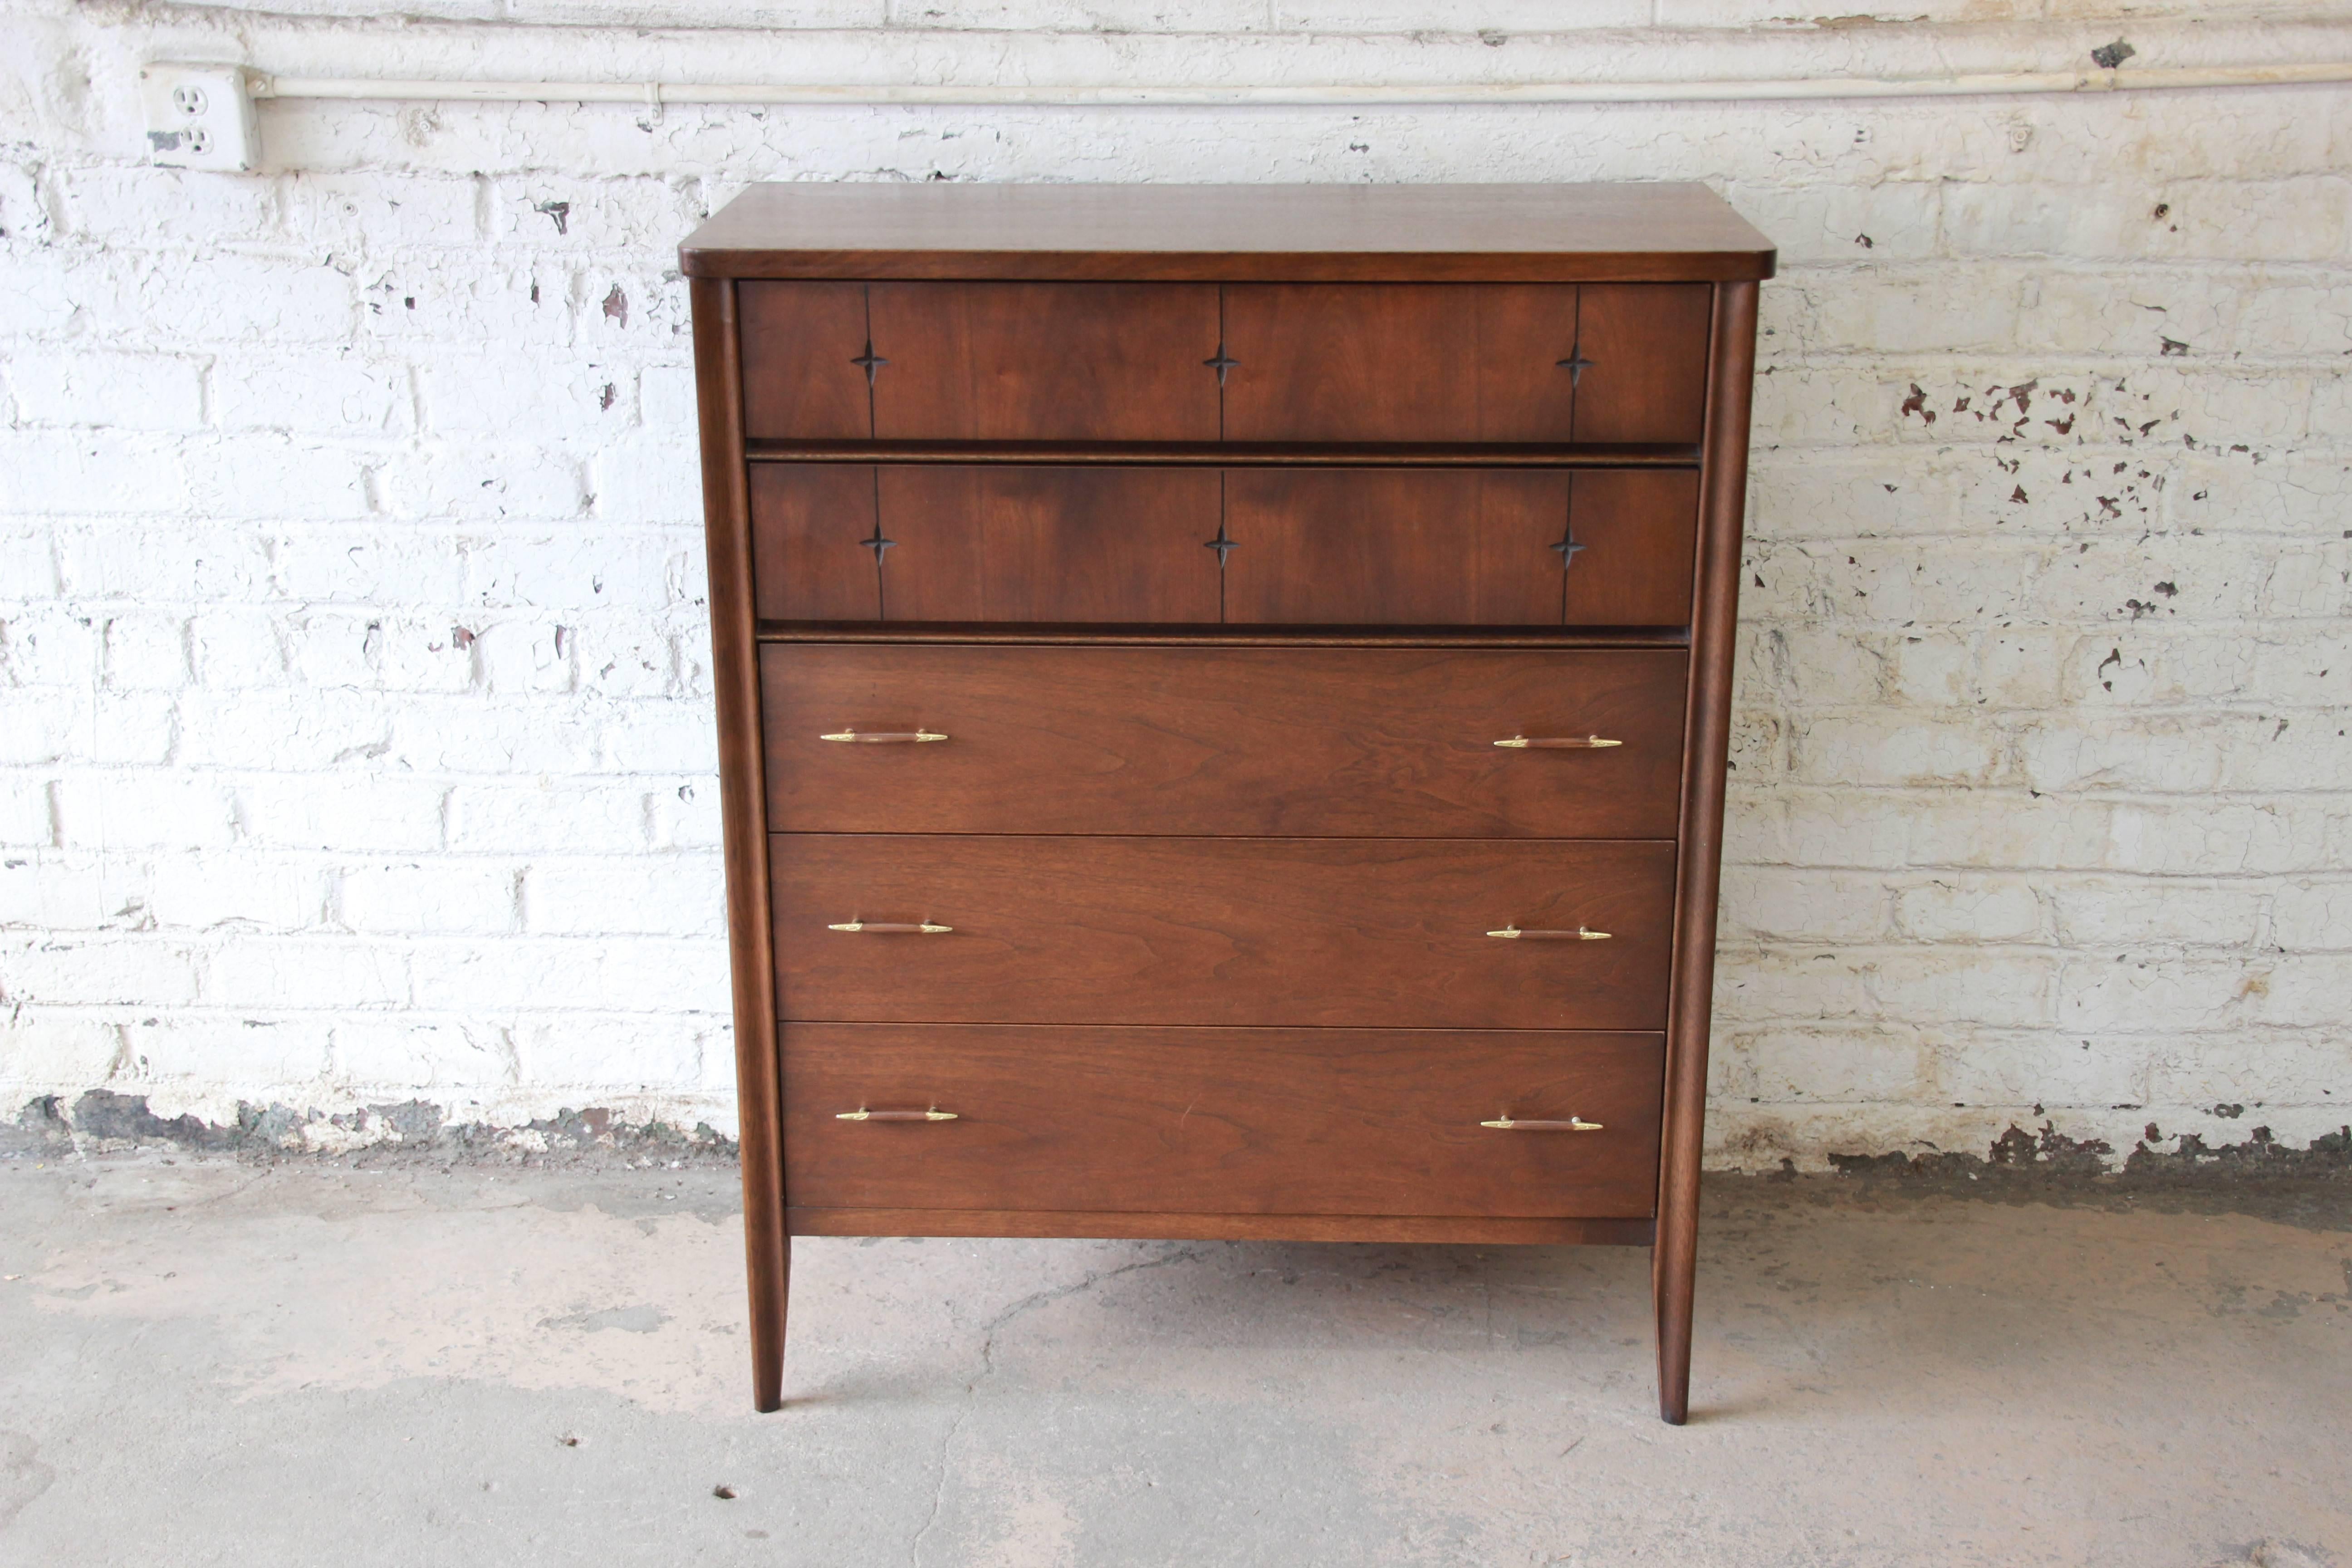 A very nice Mid-Century Modern sculpted walnut highboy dresser from the iconic 